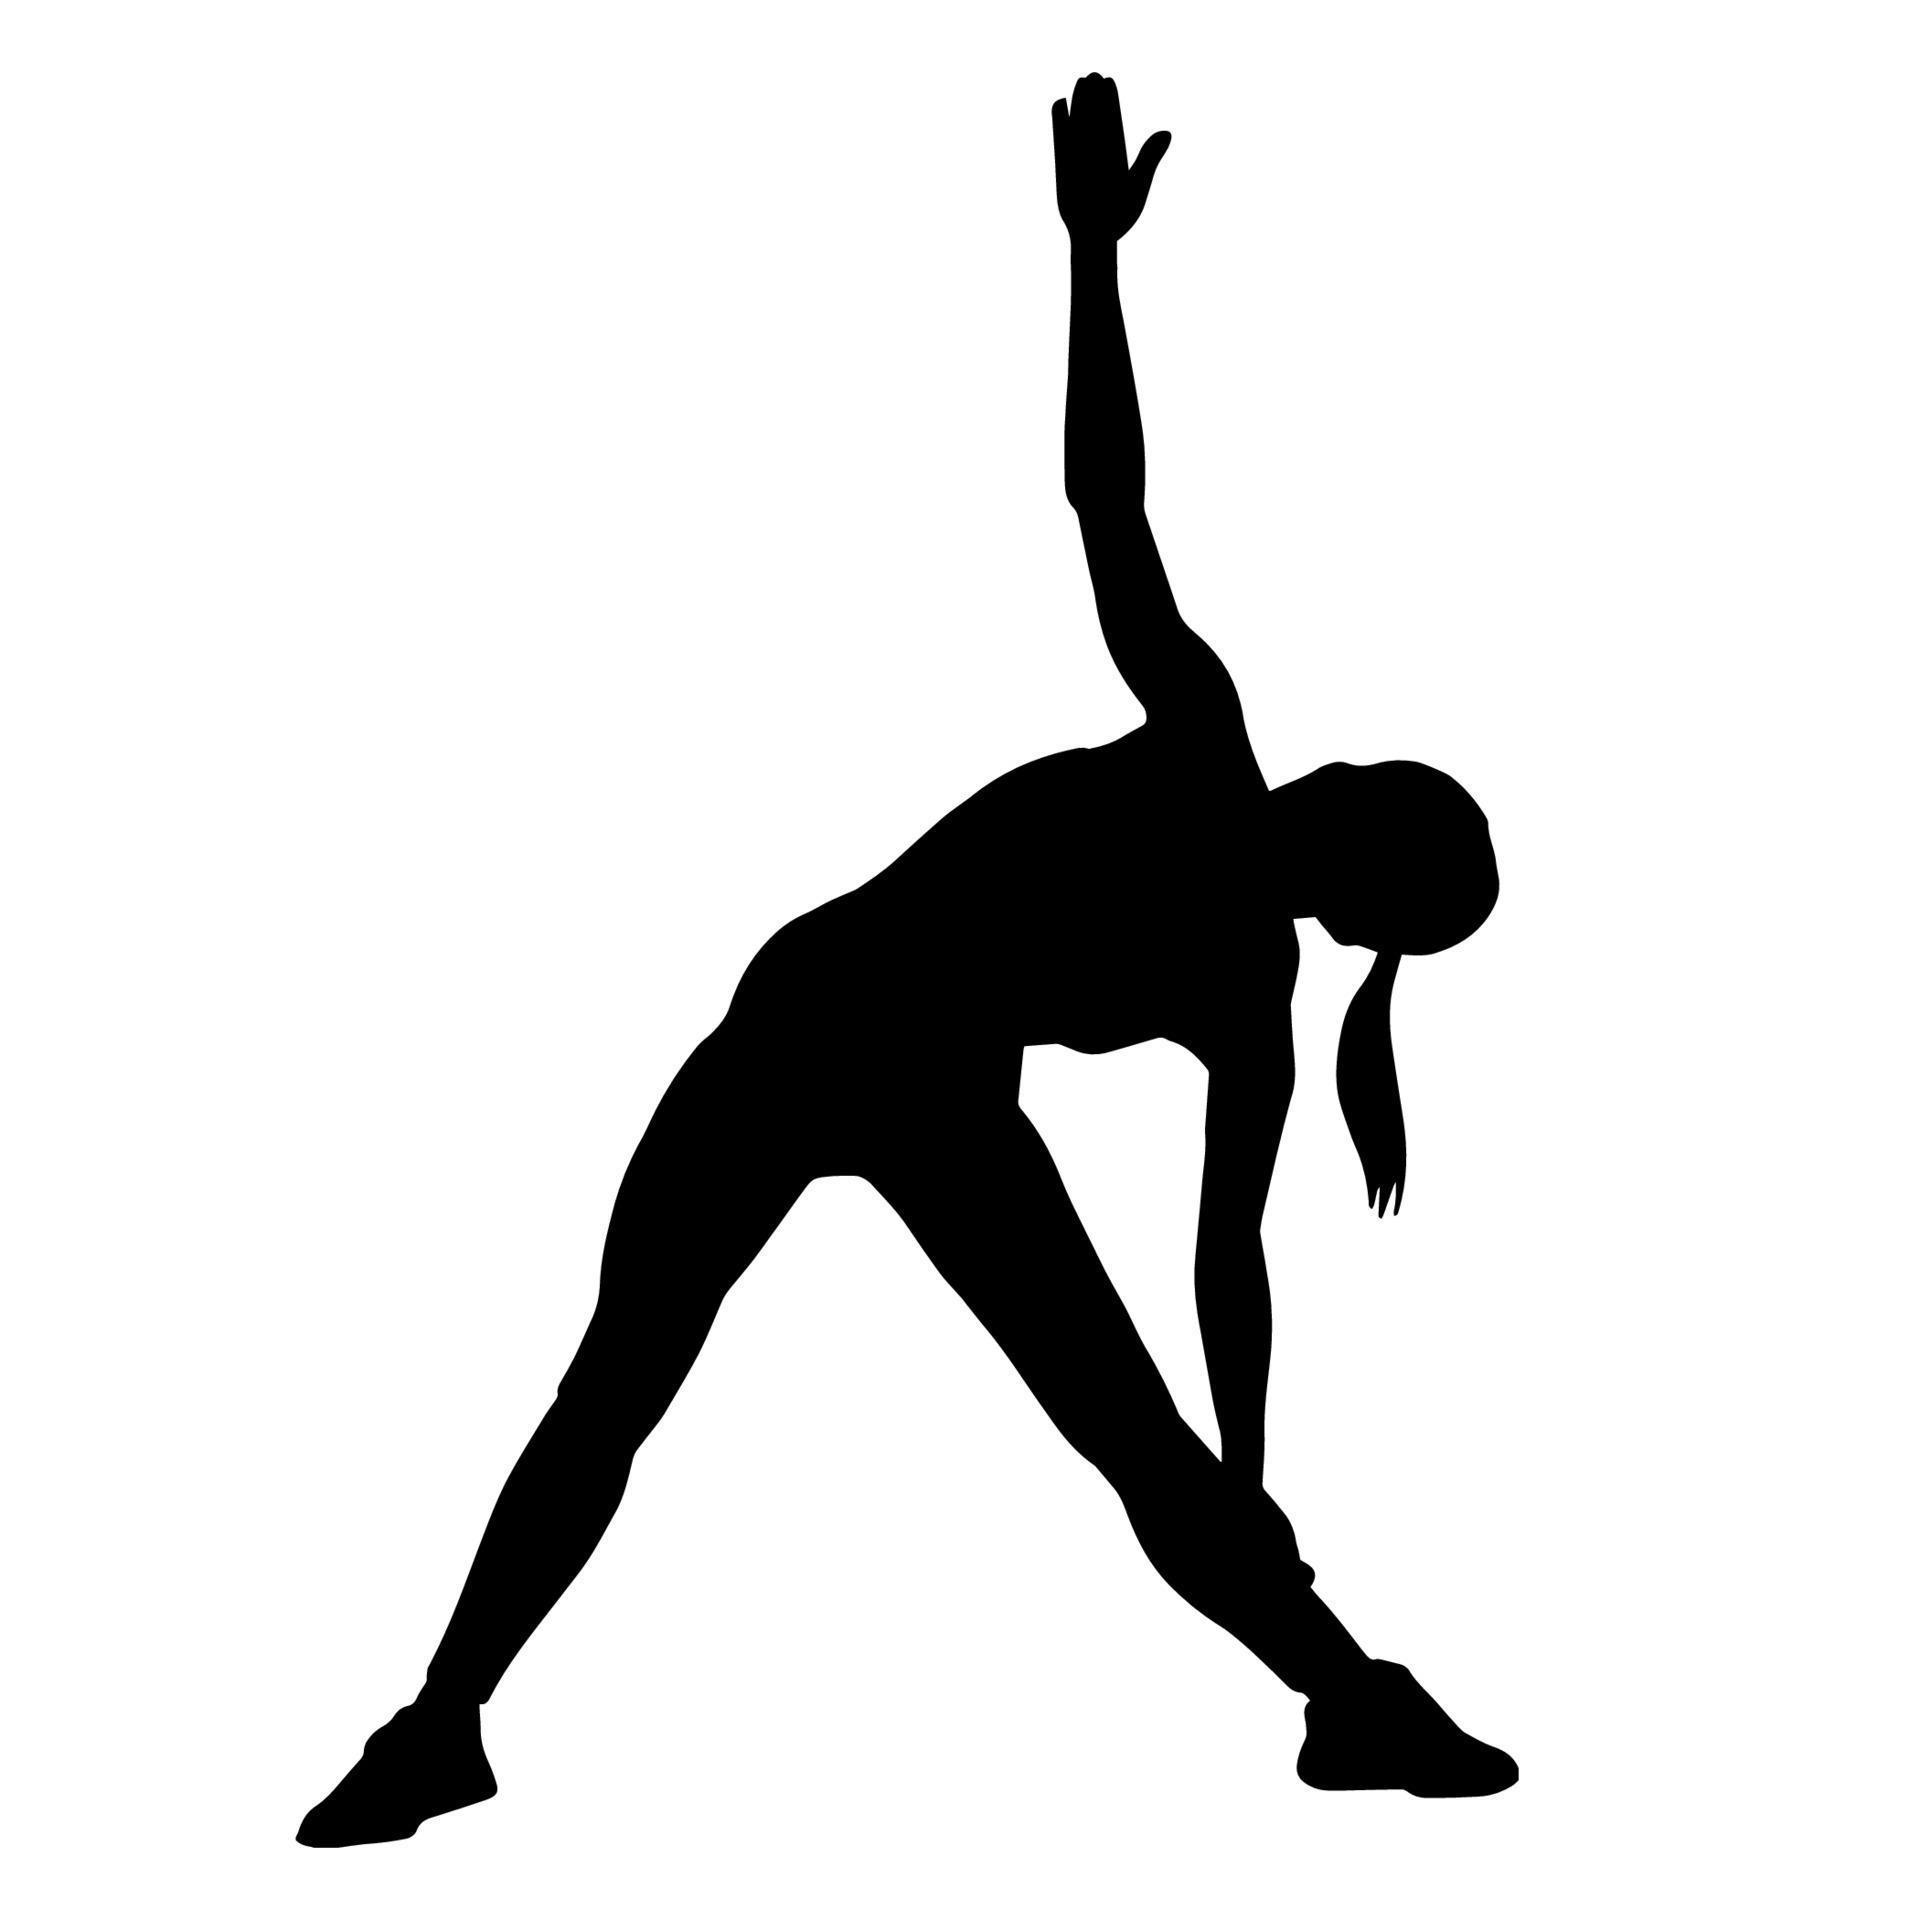 Silhouette of a woman doing exercise stretching or aerobic move ...